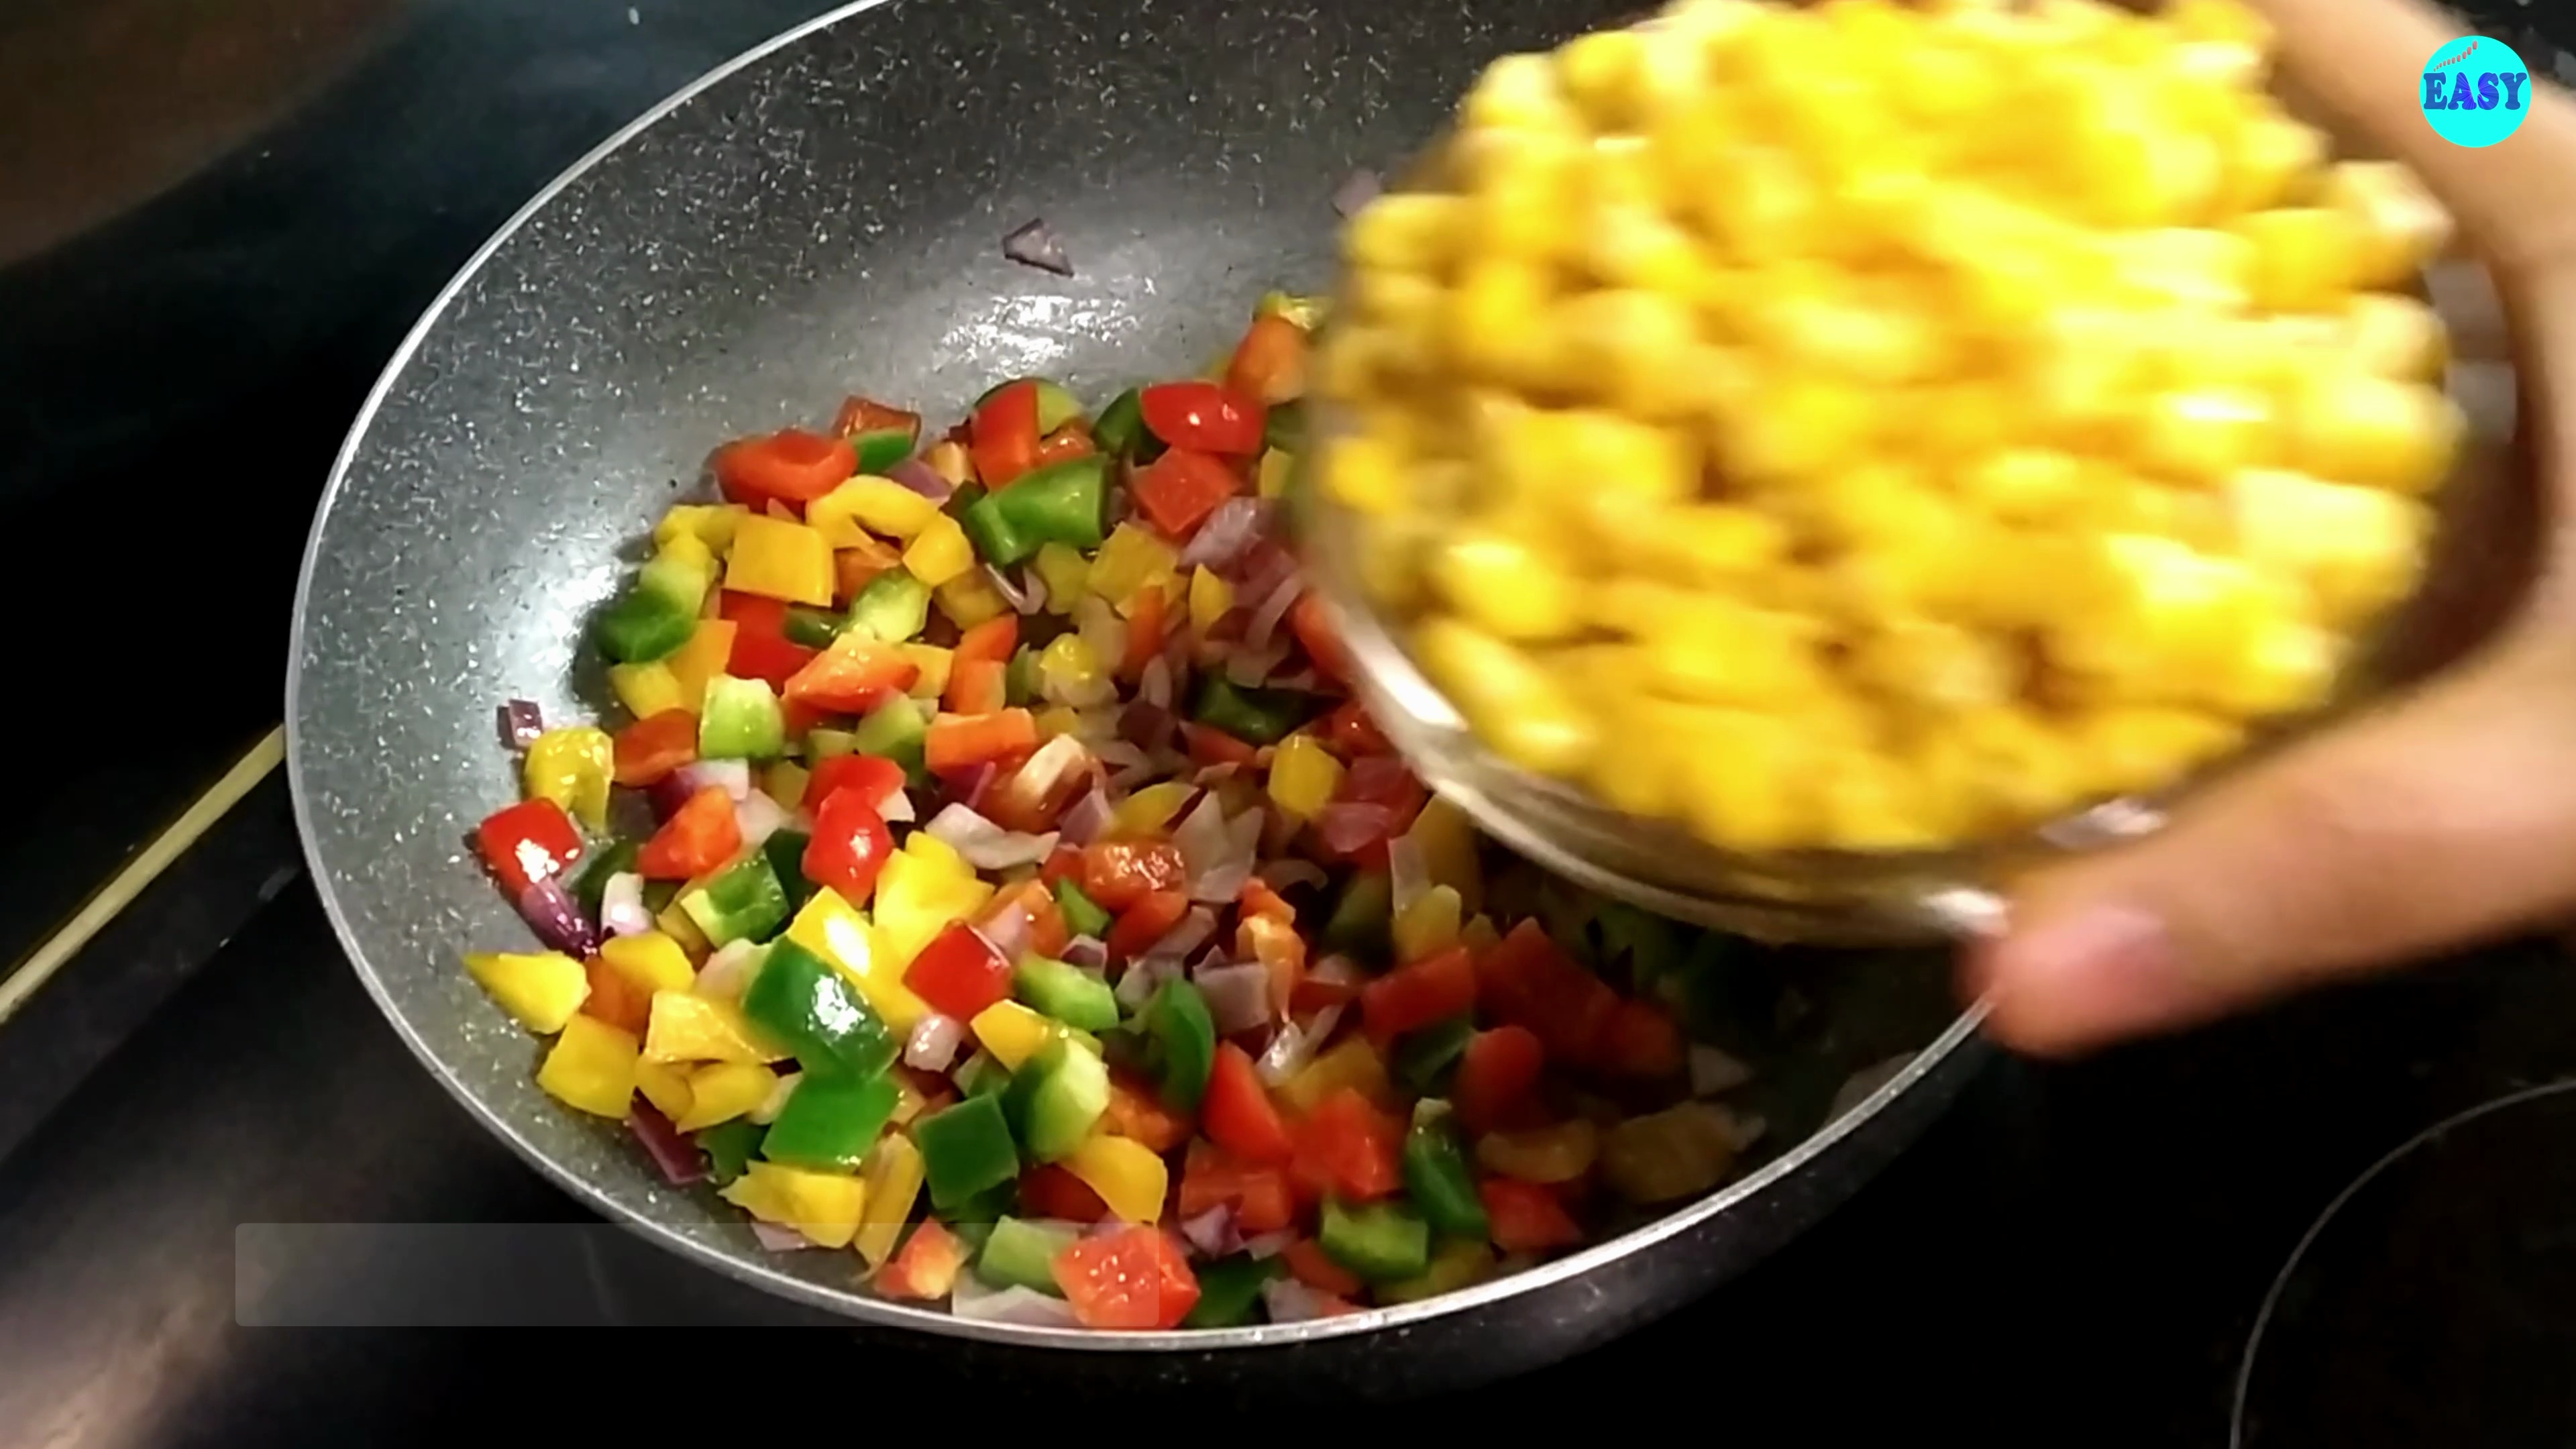 Step 3 - Add the chopped bell peppers and corns and saute for one more minute.